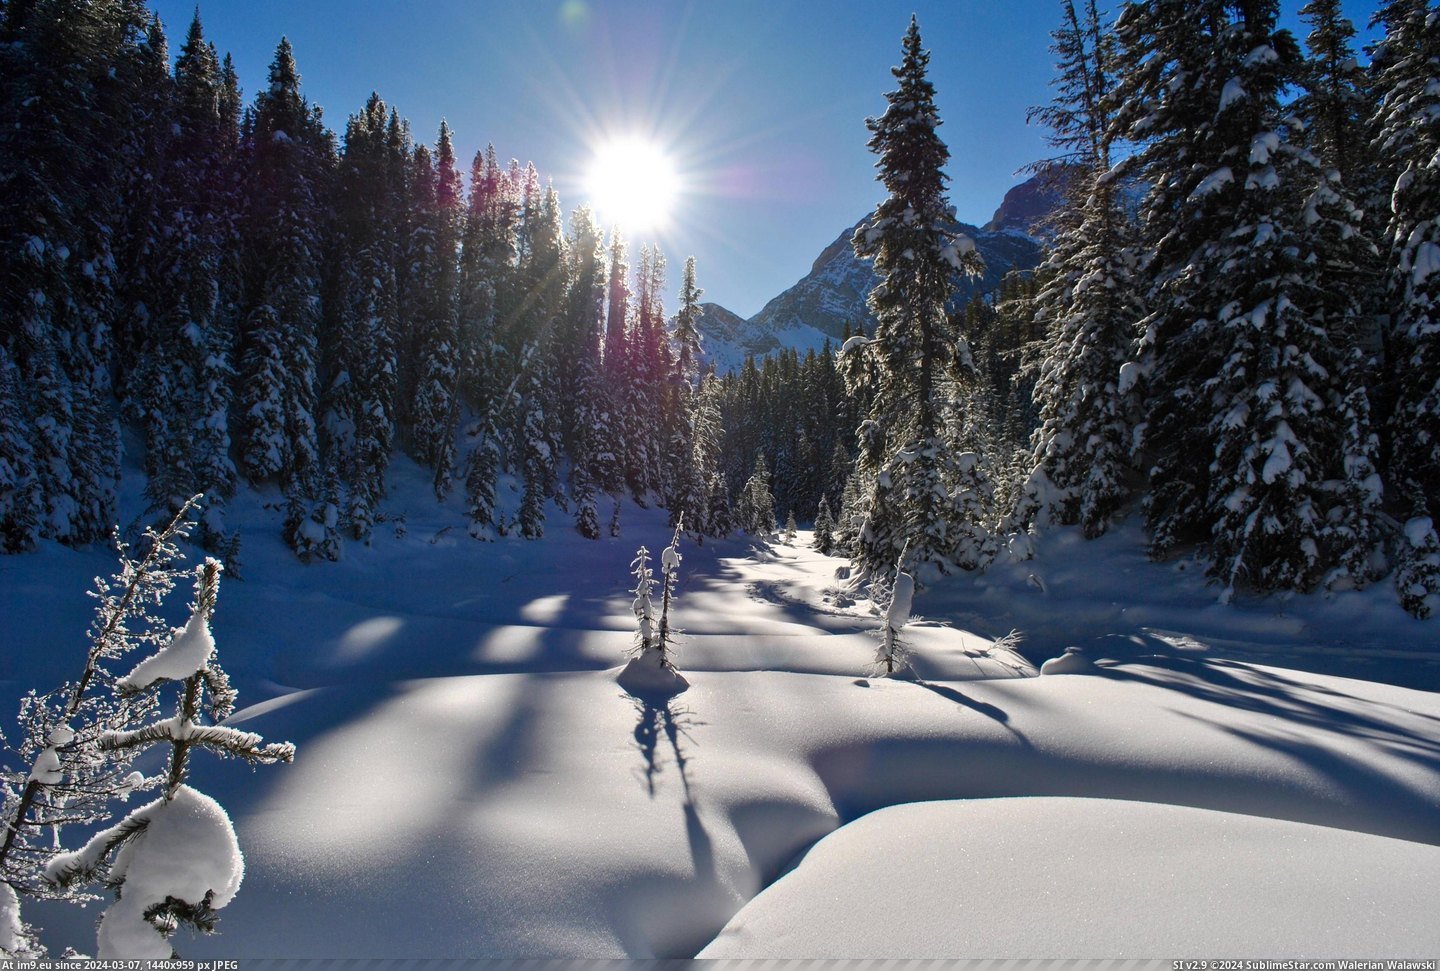 #Day #Canada #Winter #Mid #3872x2592 #Kananaskis #Country #Dead #Sun [Earthporn] Mid- day sun in the dead of winter - Kananaskis Country, AB (Canada) - [3872x2592] Pic. (Image of album My r/EARTHPORN favs))